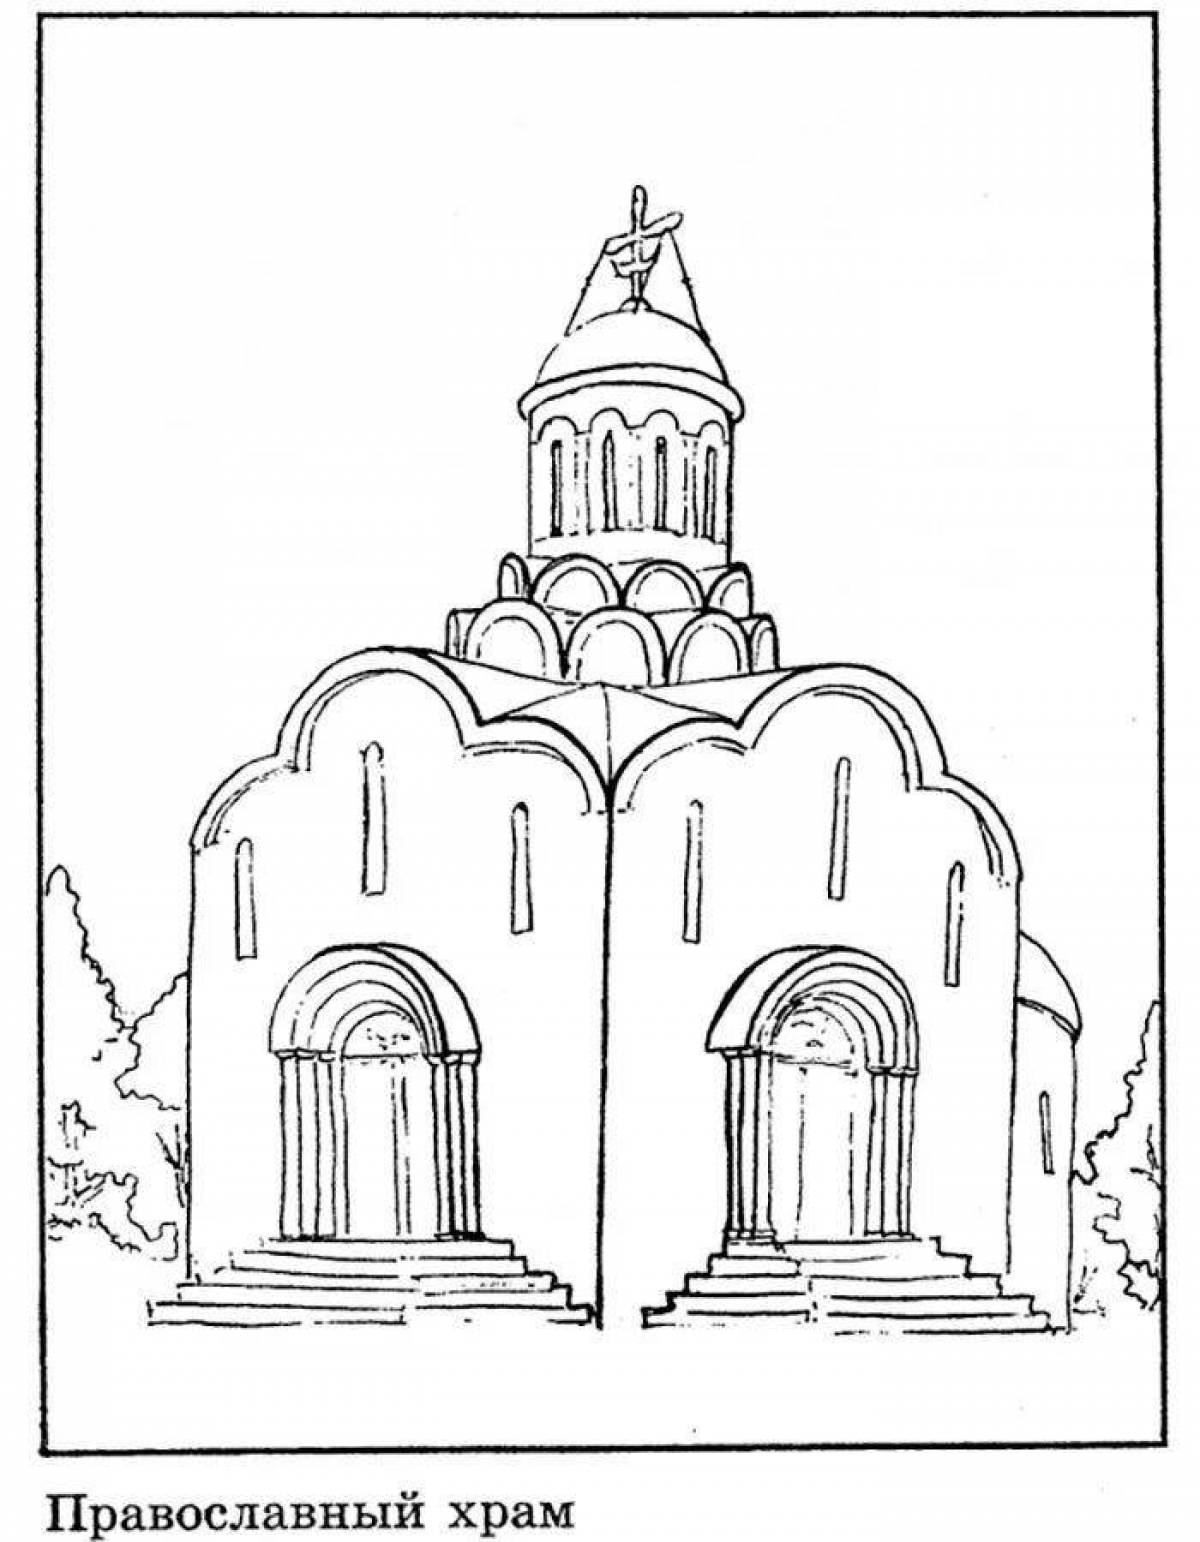 Shining Church coloring book for kids